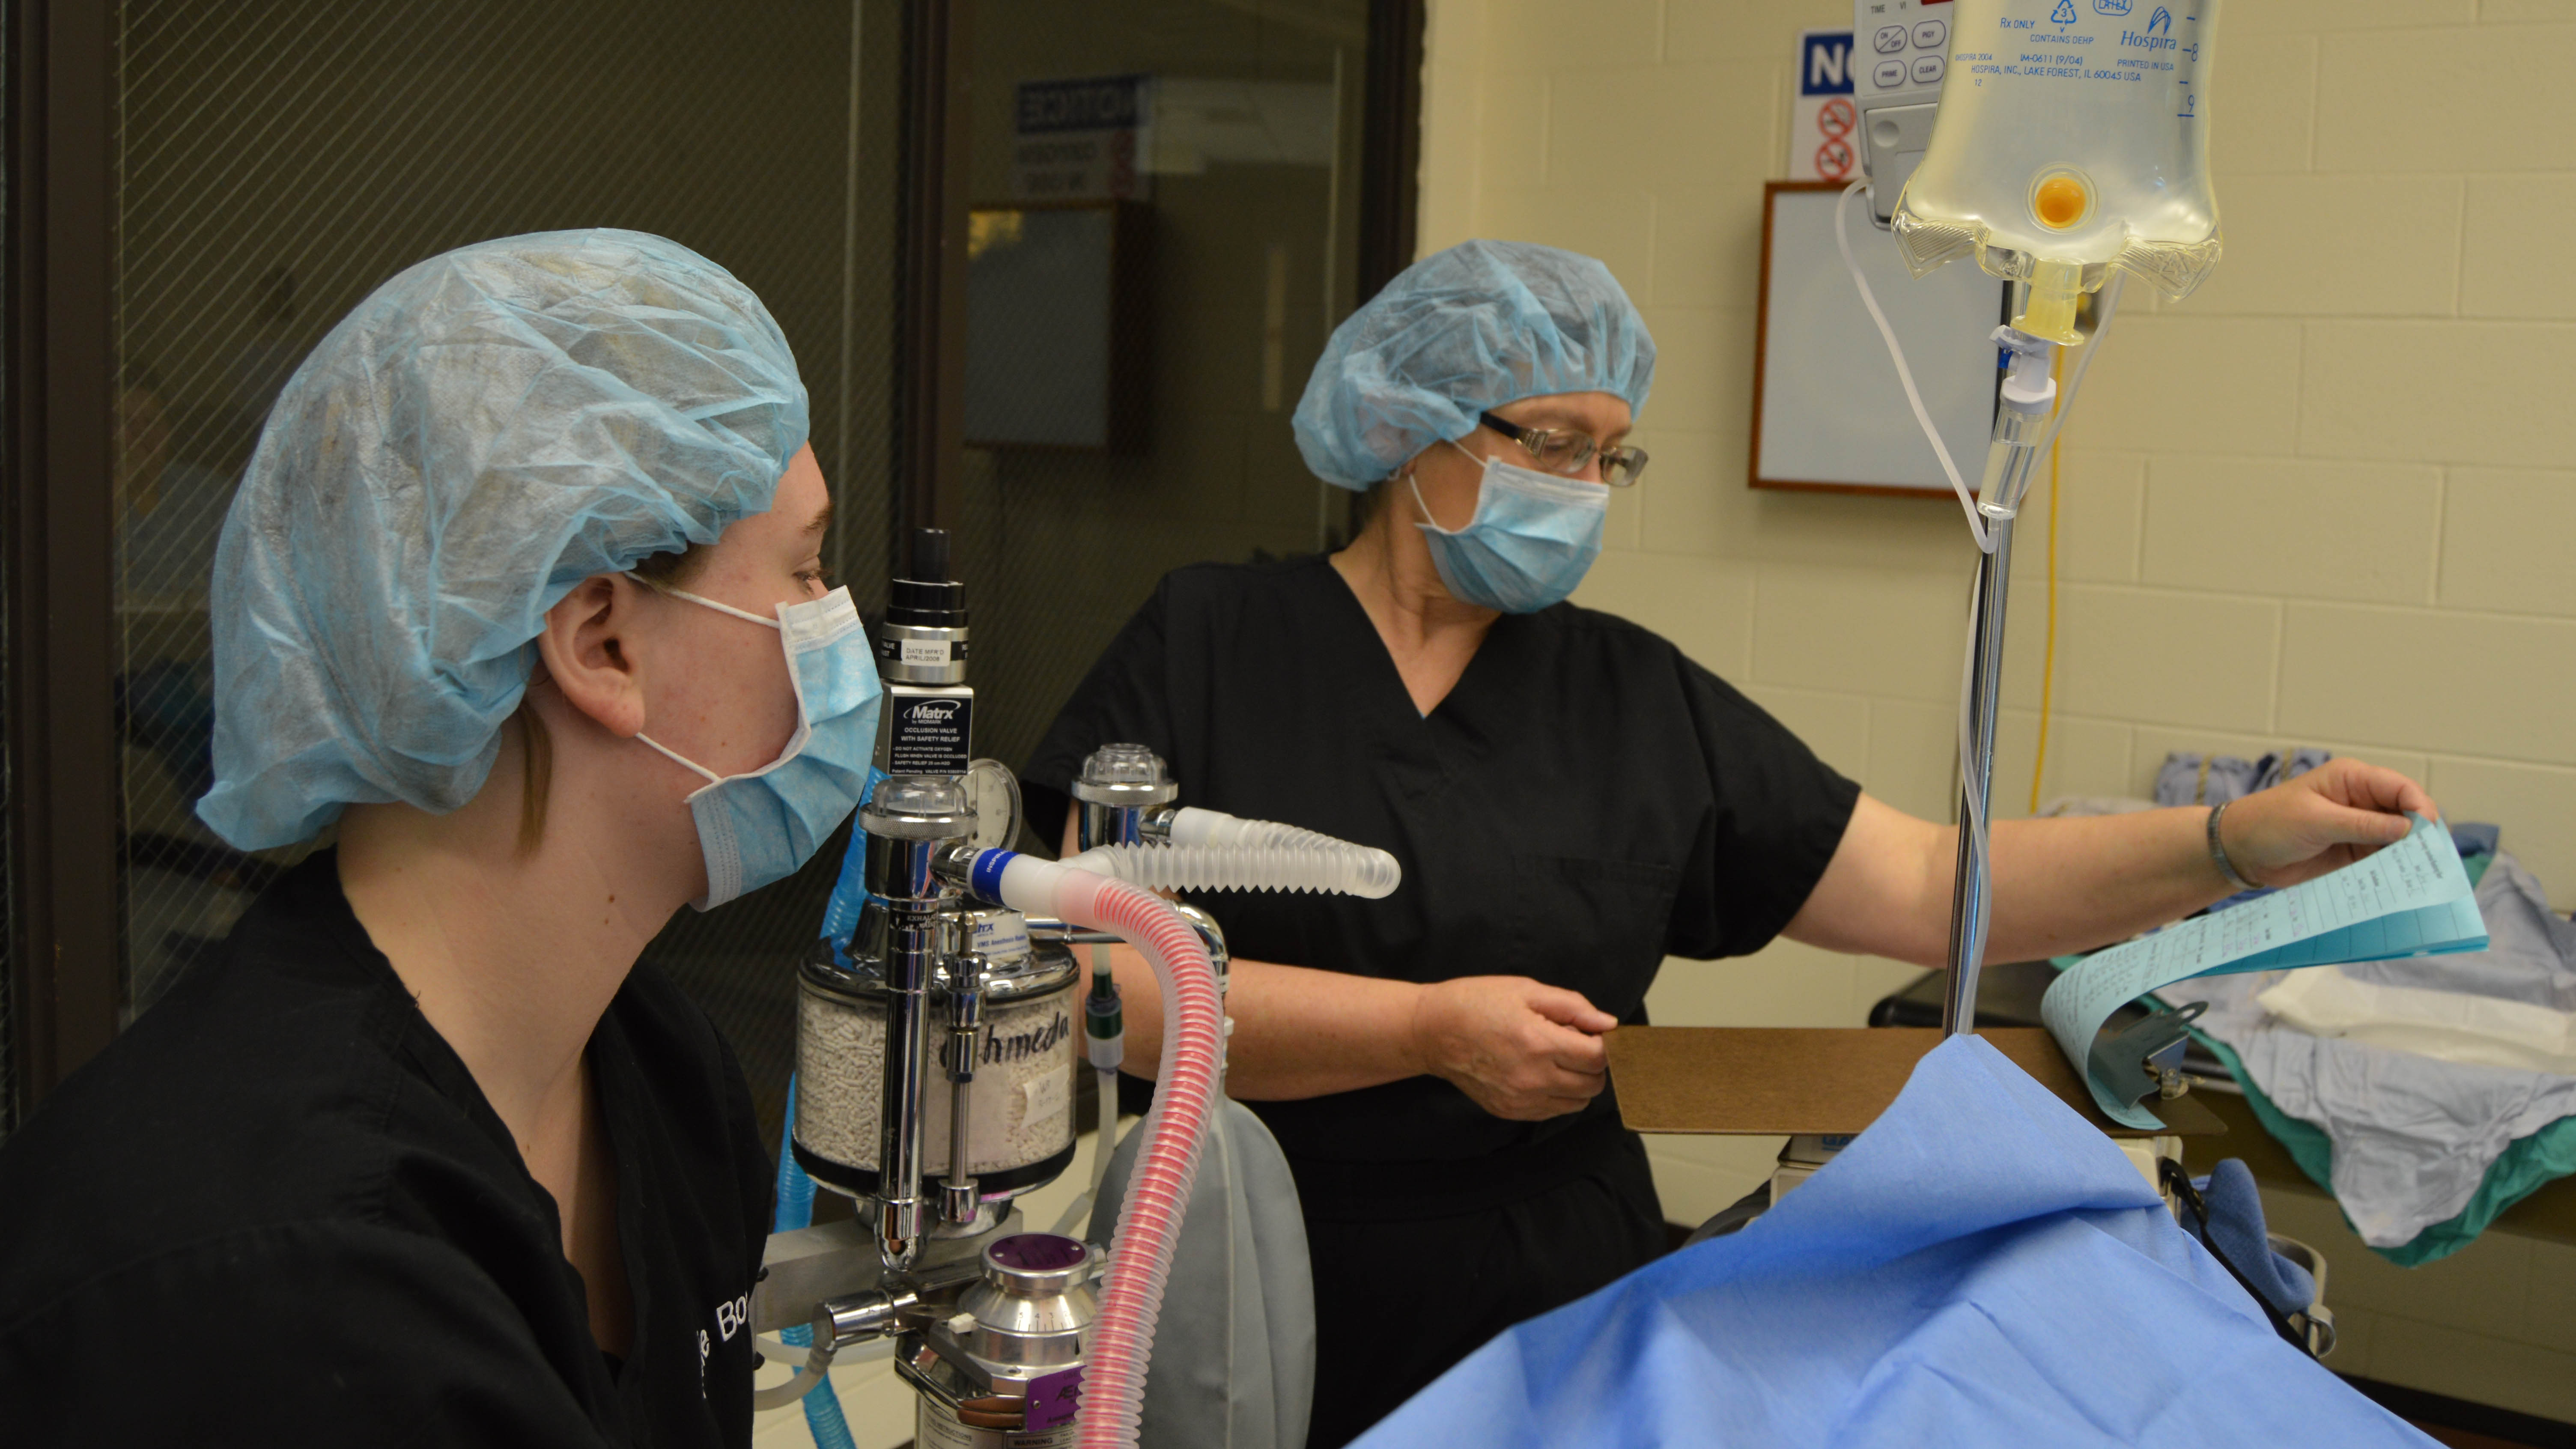 A veterinary technician student at the Nebraska College of Technical Agriculture is responsible for administering and monitoring respiration and anesthesia to a dog during surgery. Instructor Barb Berg, LVT, at right, reviews the charts during the procedure. (Mary Crawford / NCTA News photo)